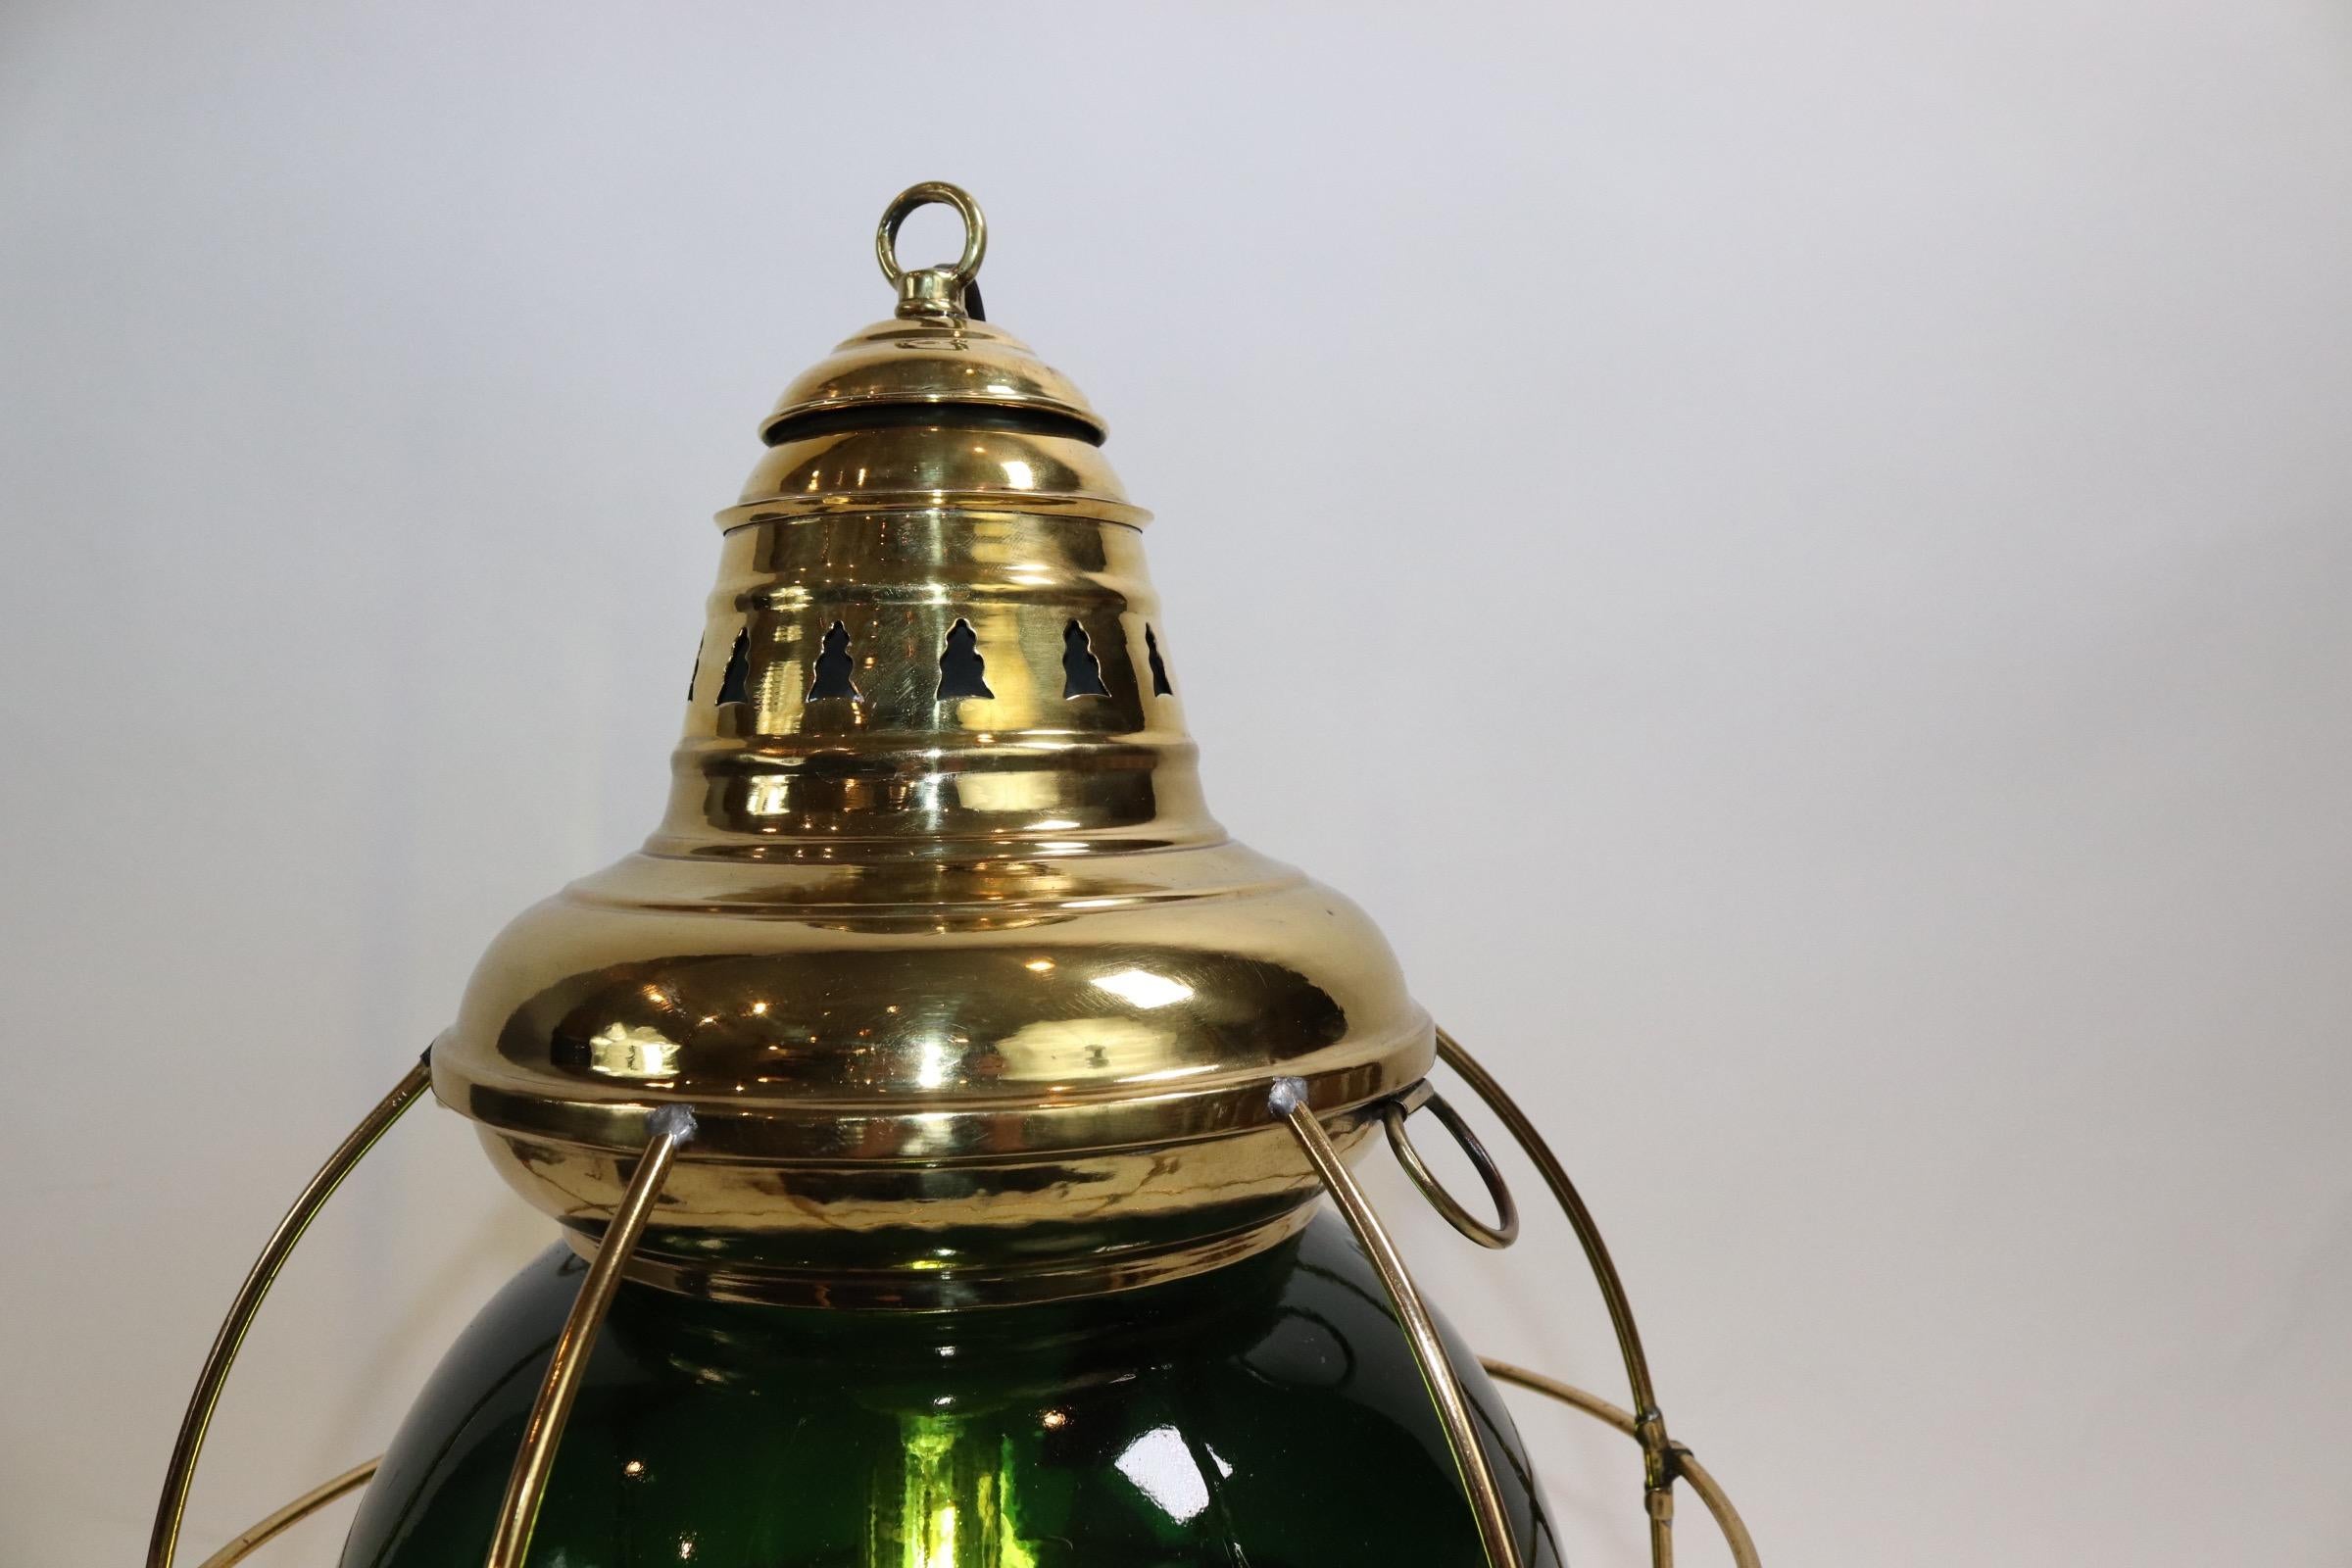 Solid brass ships onion lantern with green lens. Highly polished and lacquered. Wired with electricity for home display. Fitted with a protective brass cage and ten inch dark green lens marked Perkins. Weight is 7 pounds.